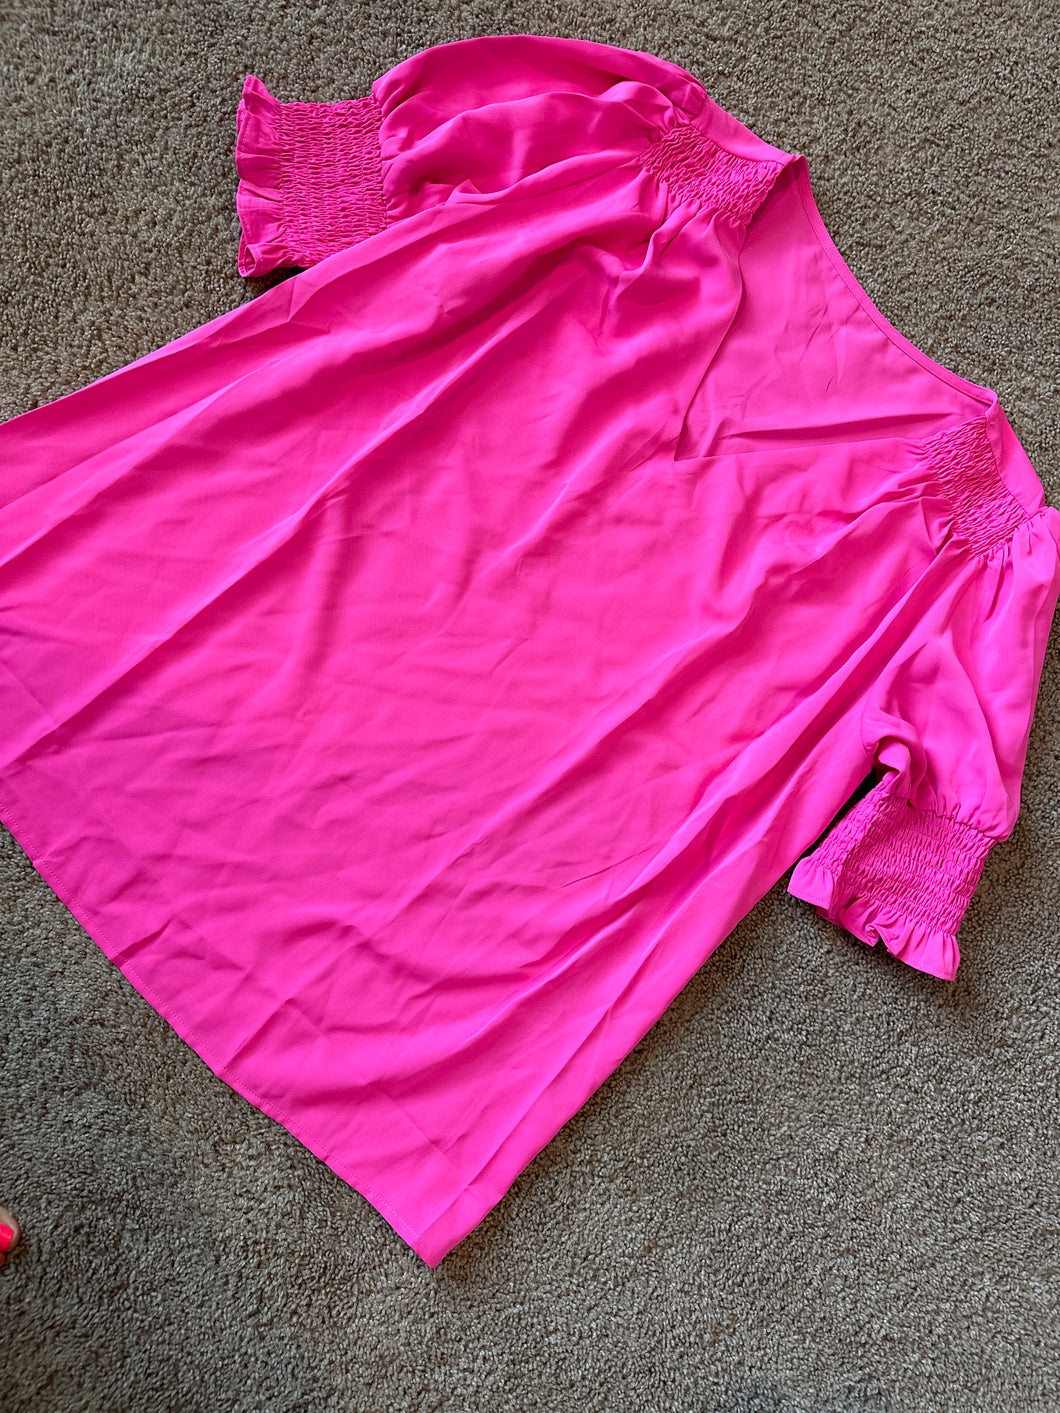 New!! Womens hot pink dress shirt Large from Jane.com Adult Large